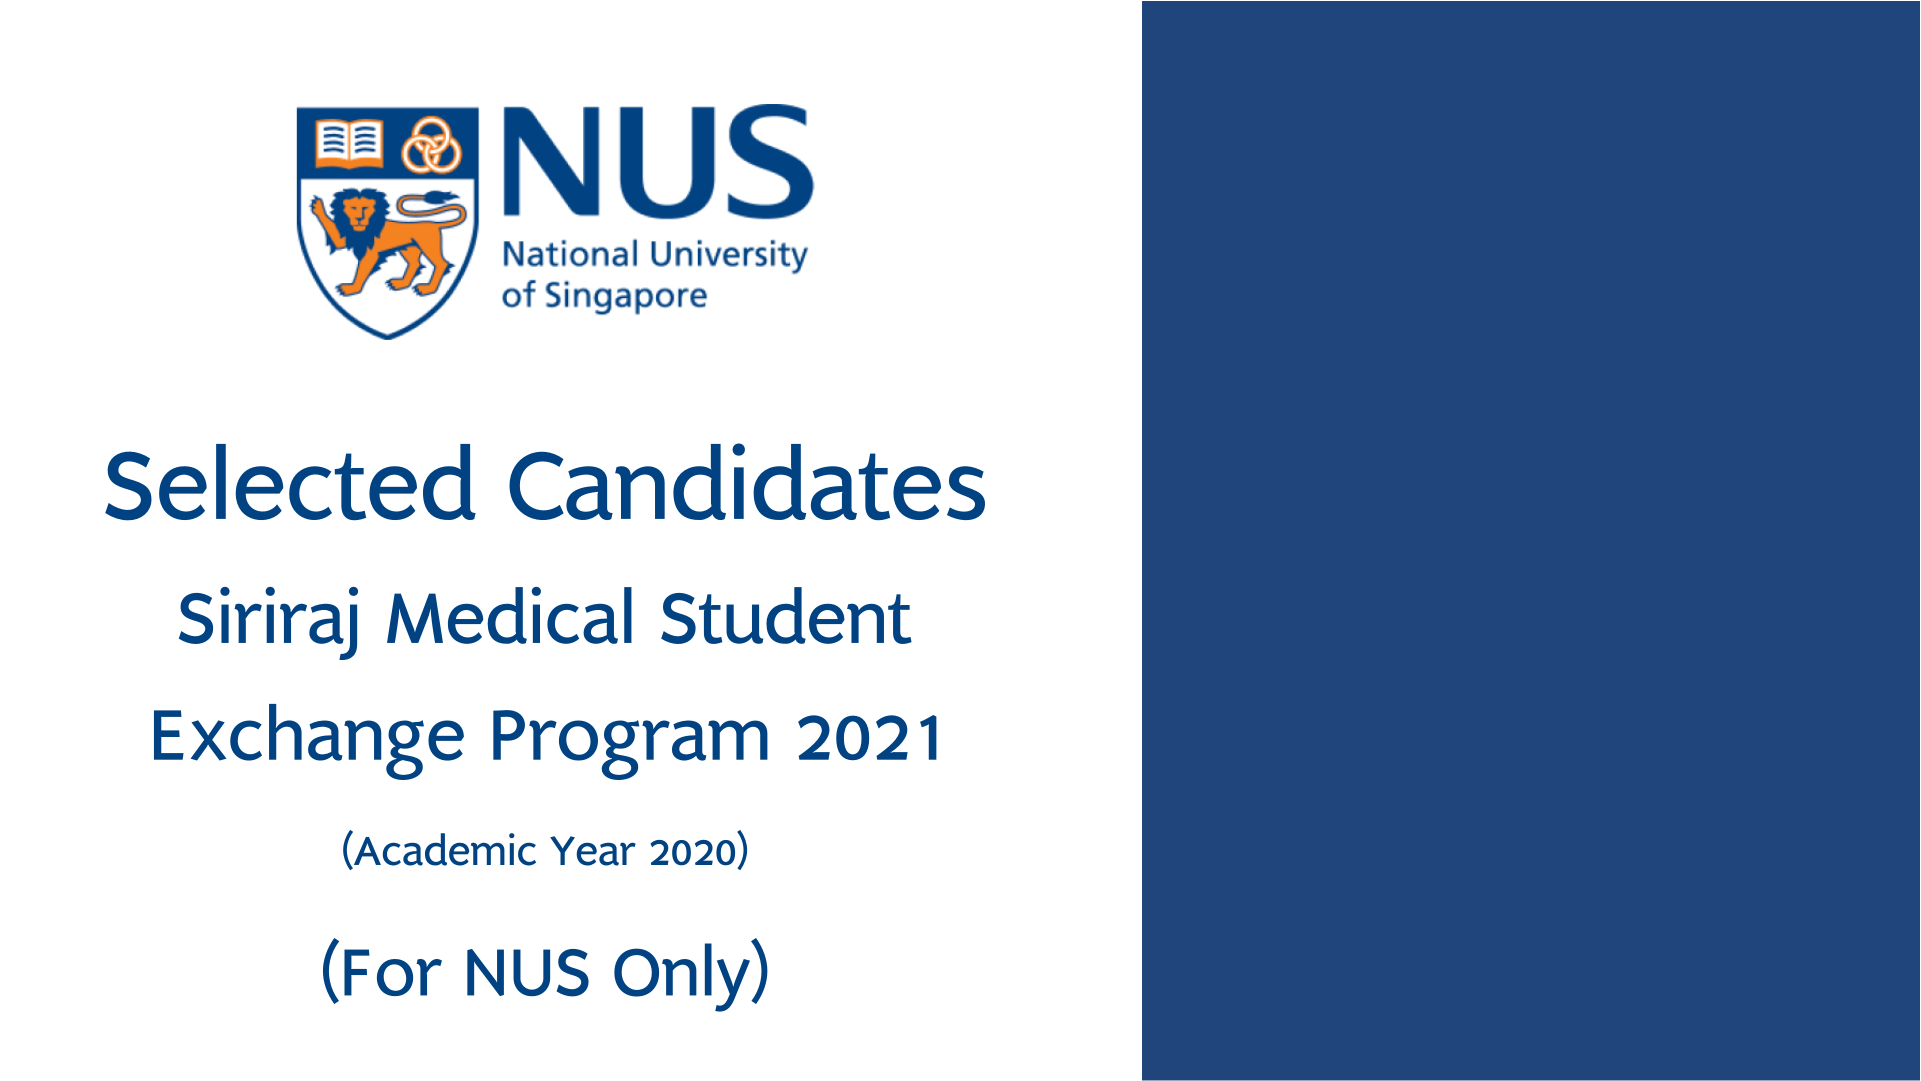 Selected Candidates for Exchange Program 2021 at NUS